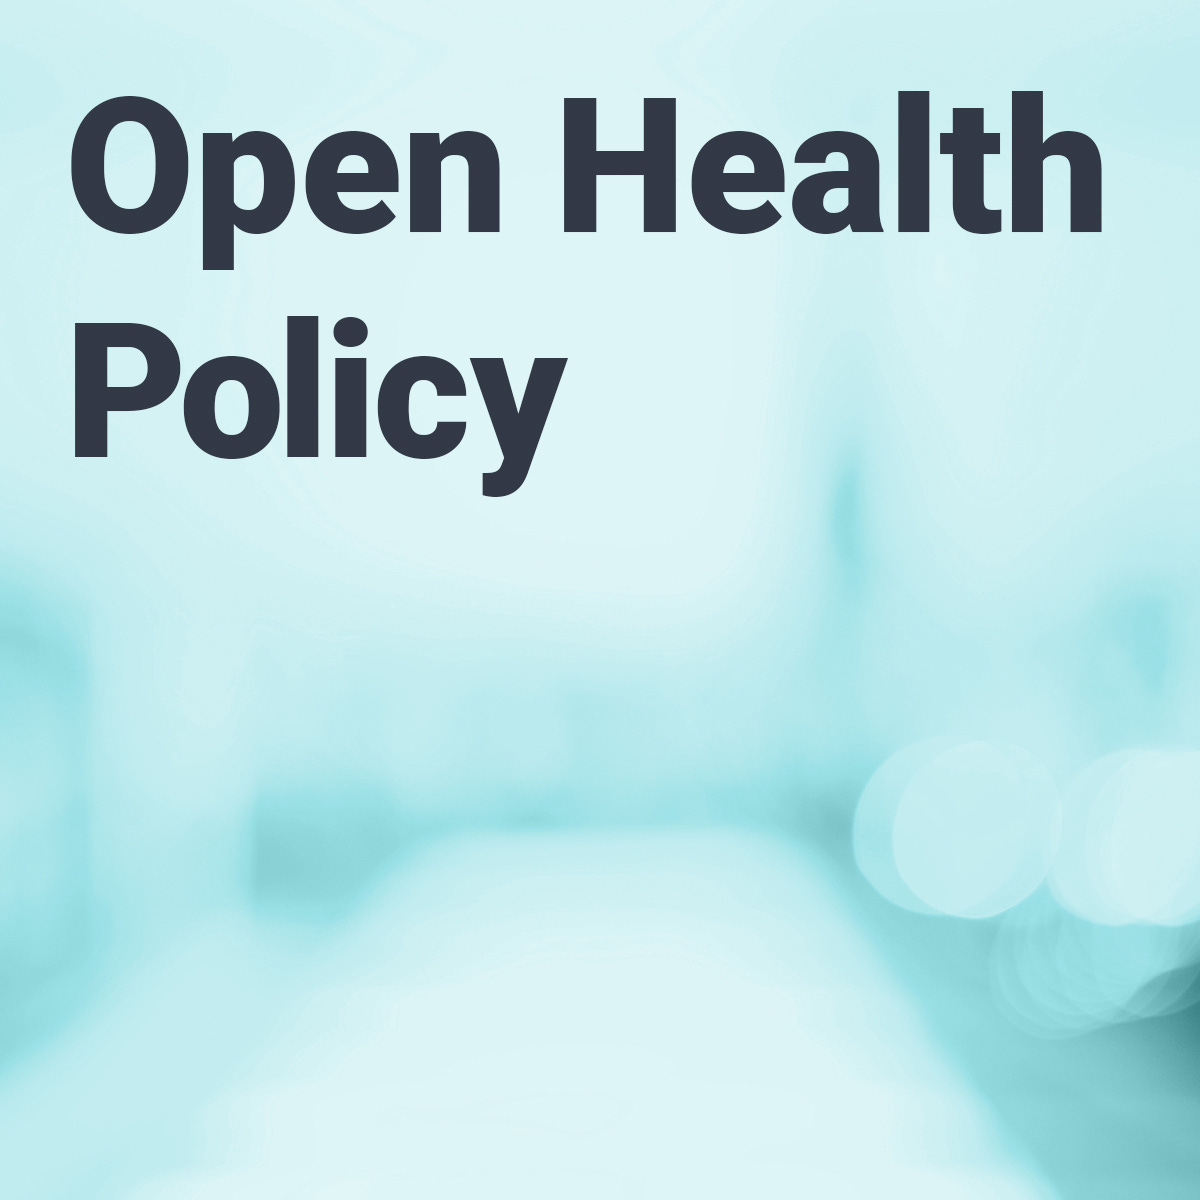 Open Health Policy